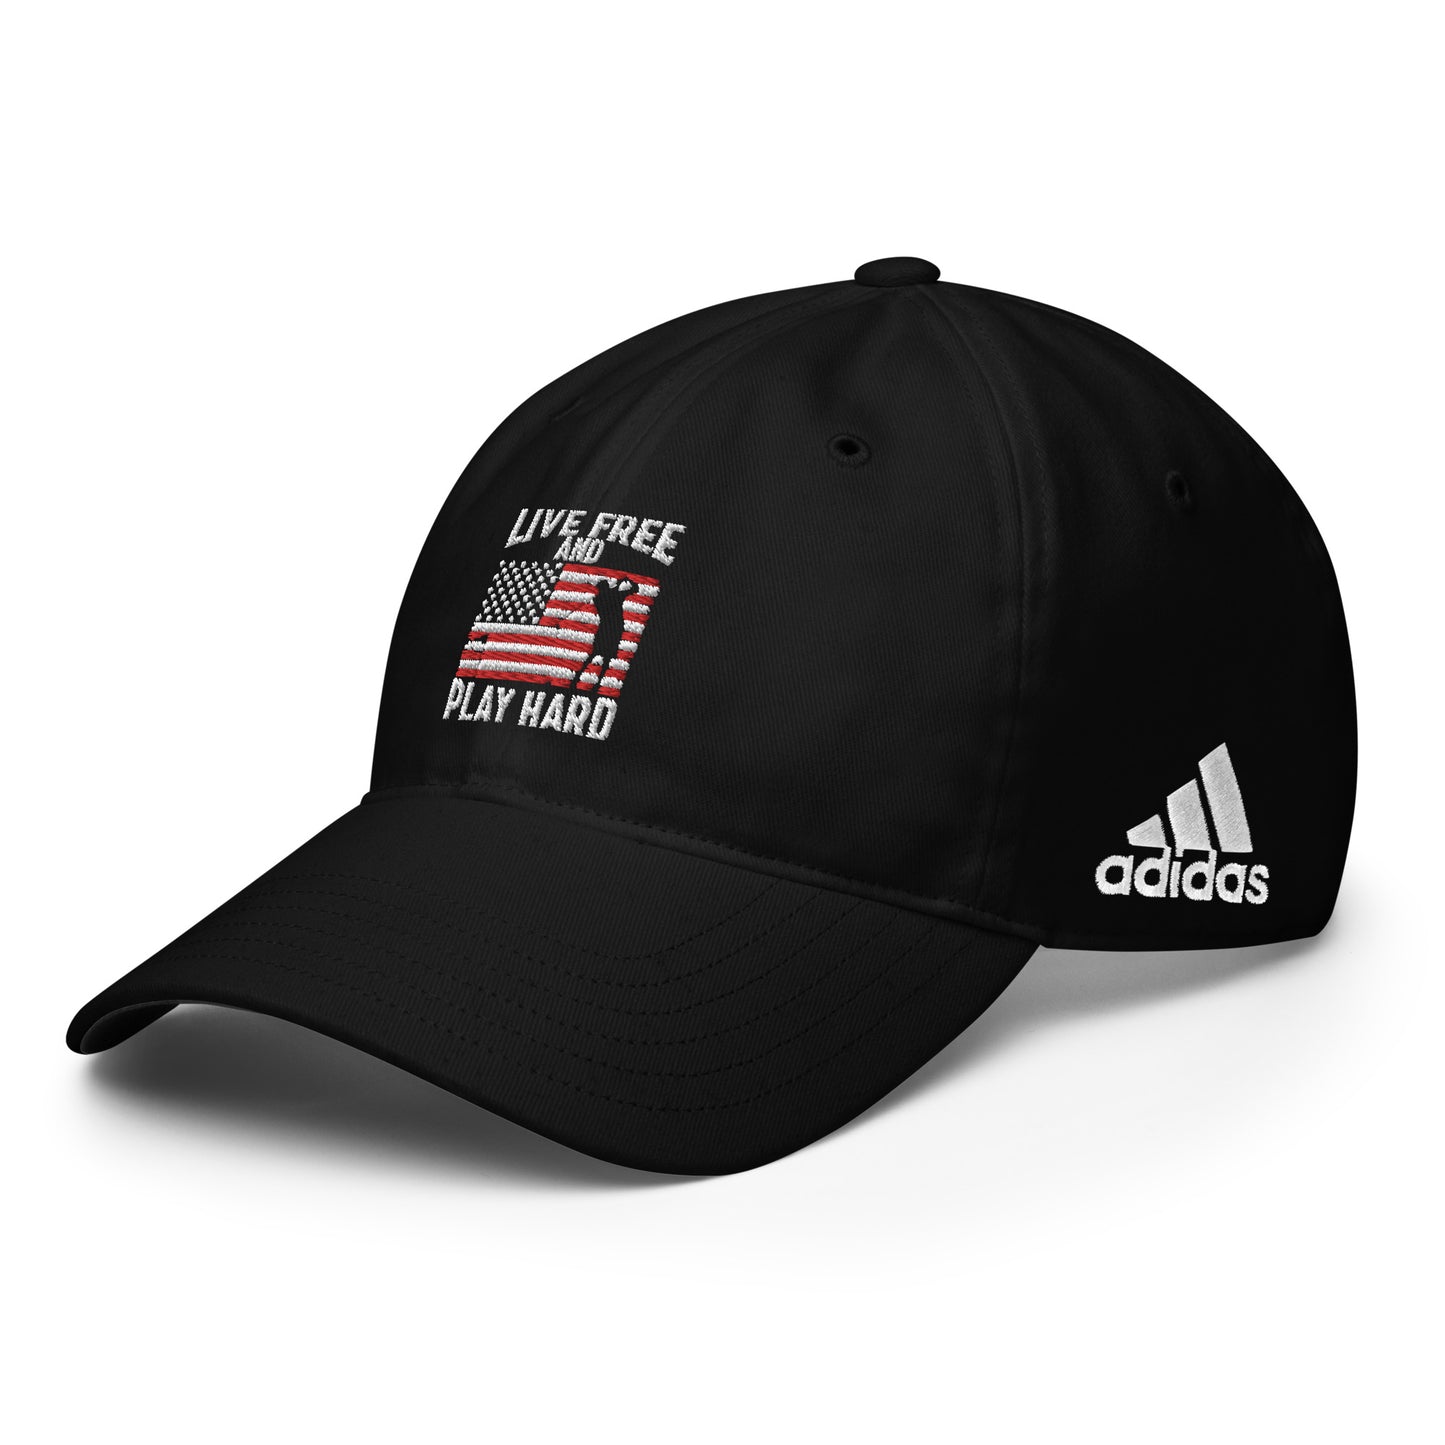 Adidas 'Live Free and Play Hard' Performance Golf Cap